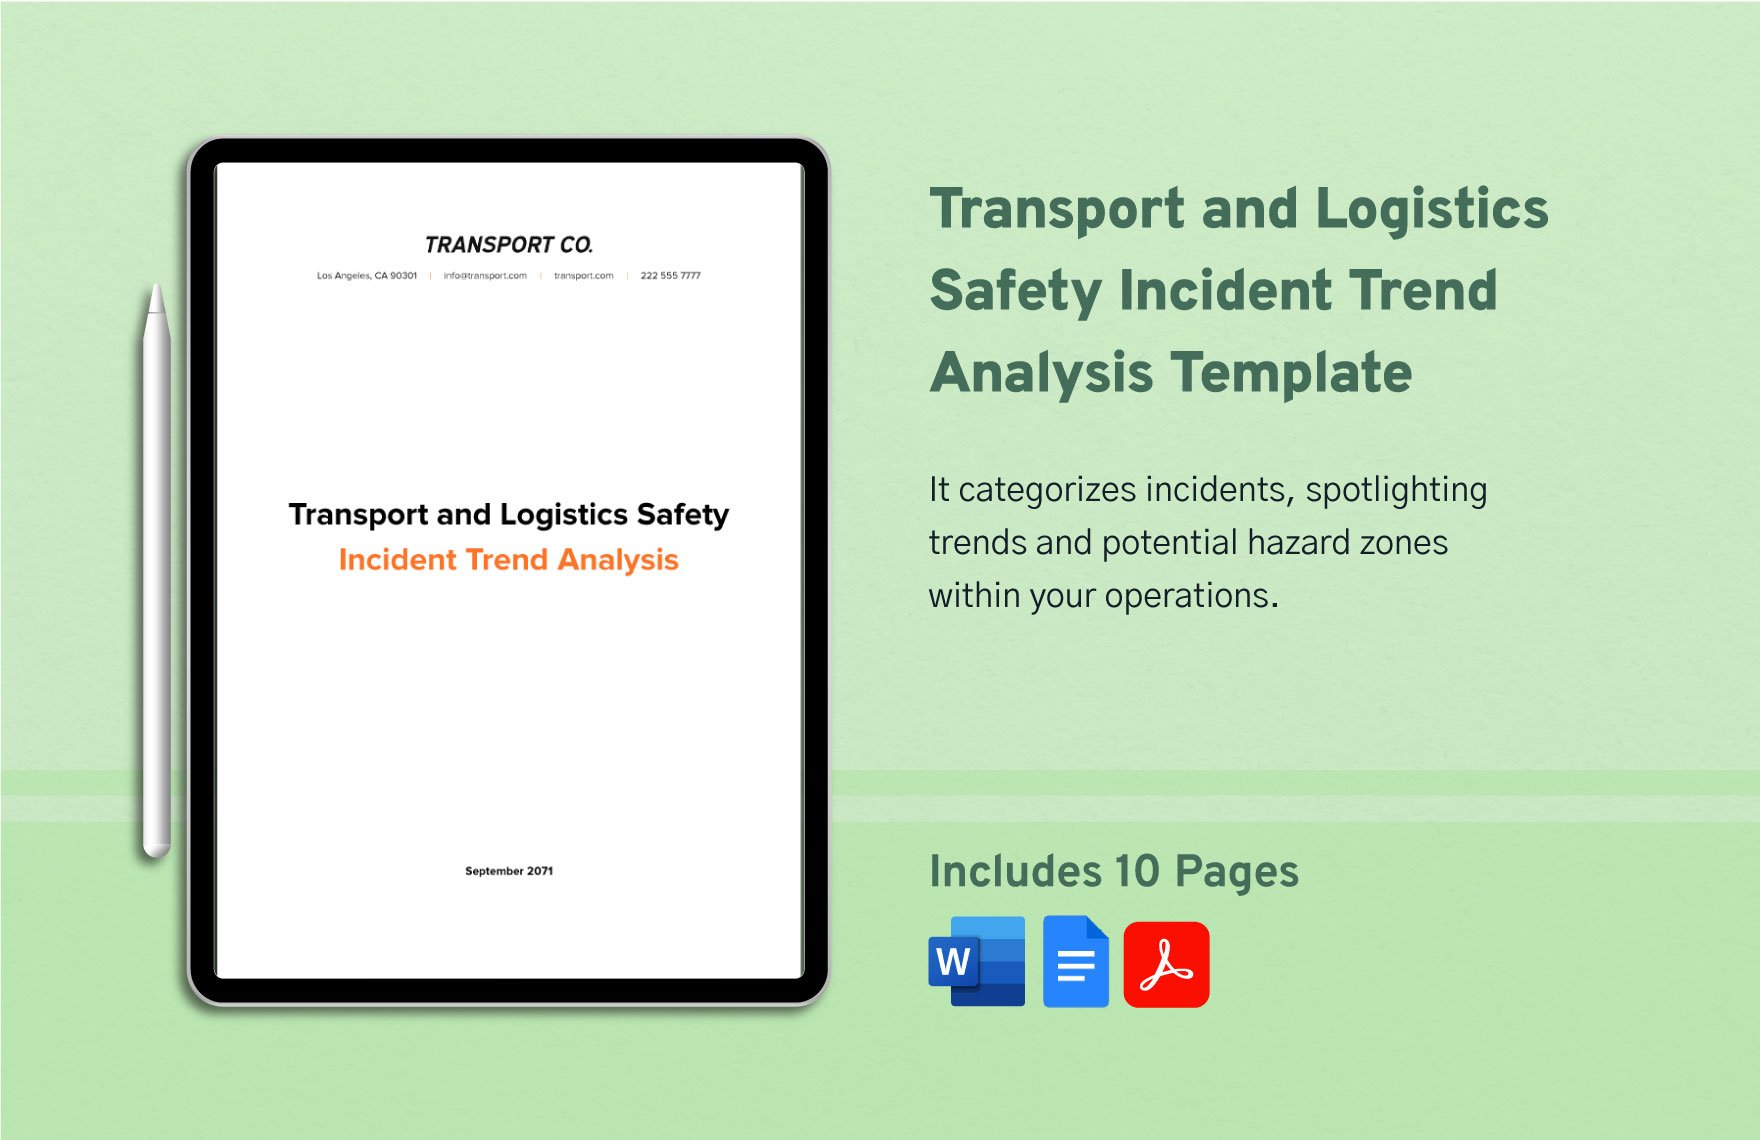 Transport and Logistics Safety Incident Trend Analysis Template in Word, Google Docs, PDF